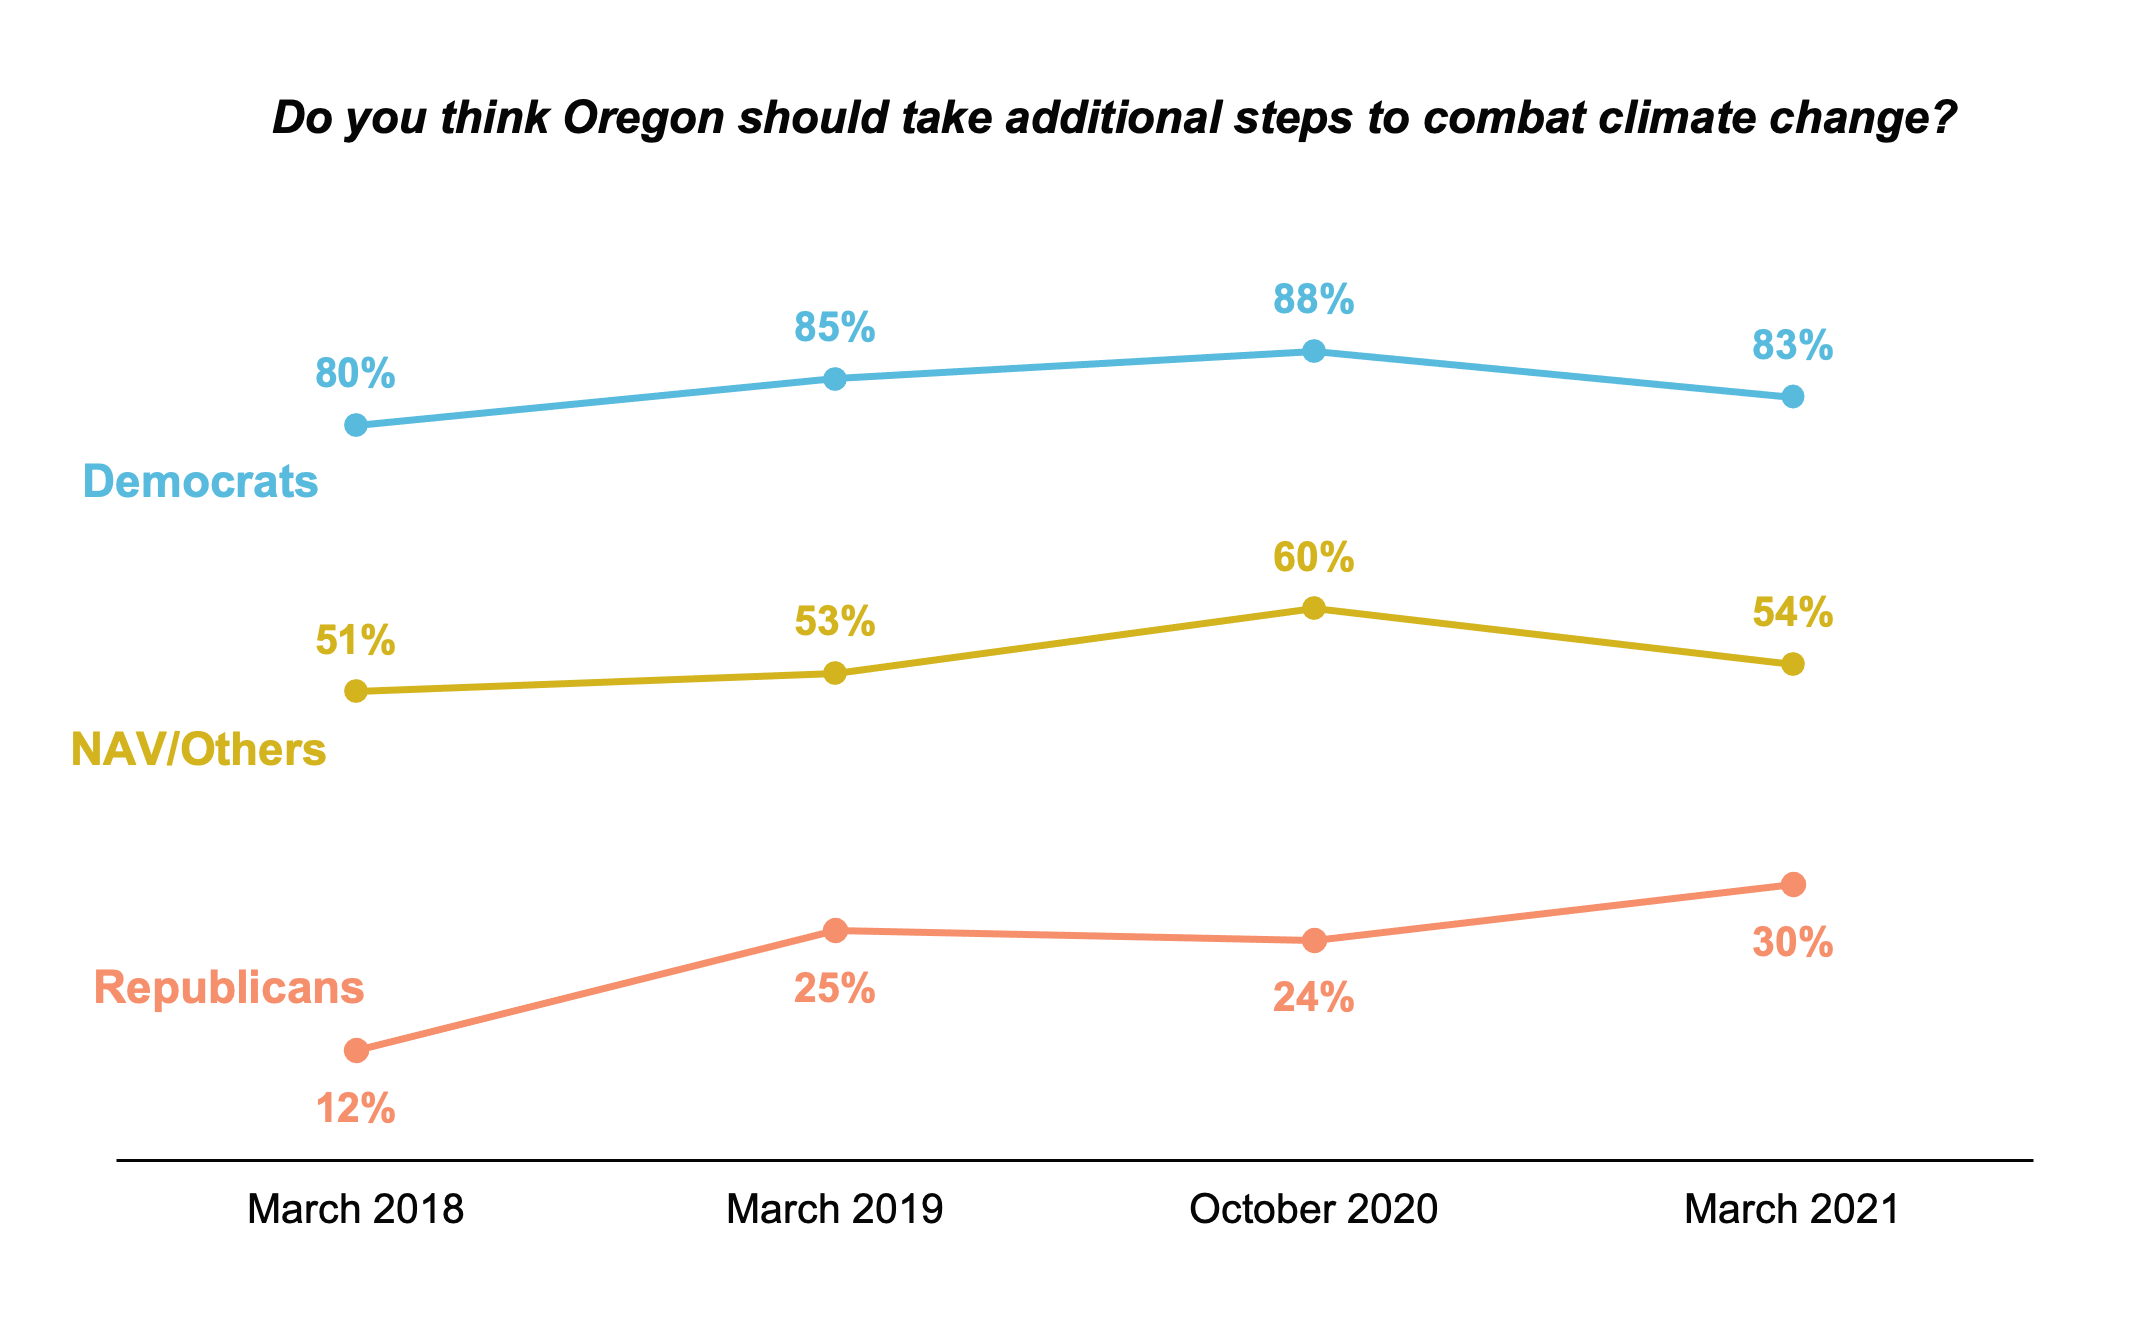 Line graph results over time asking residents if Oregon should take additional steps to combat climate change. Separated by political affiliation.